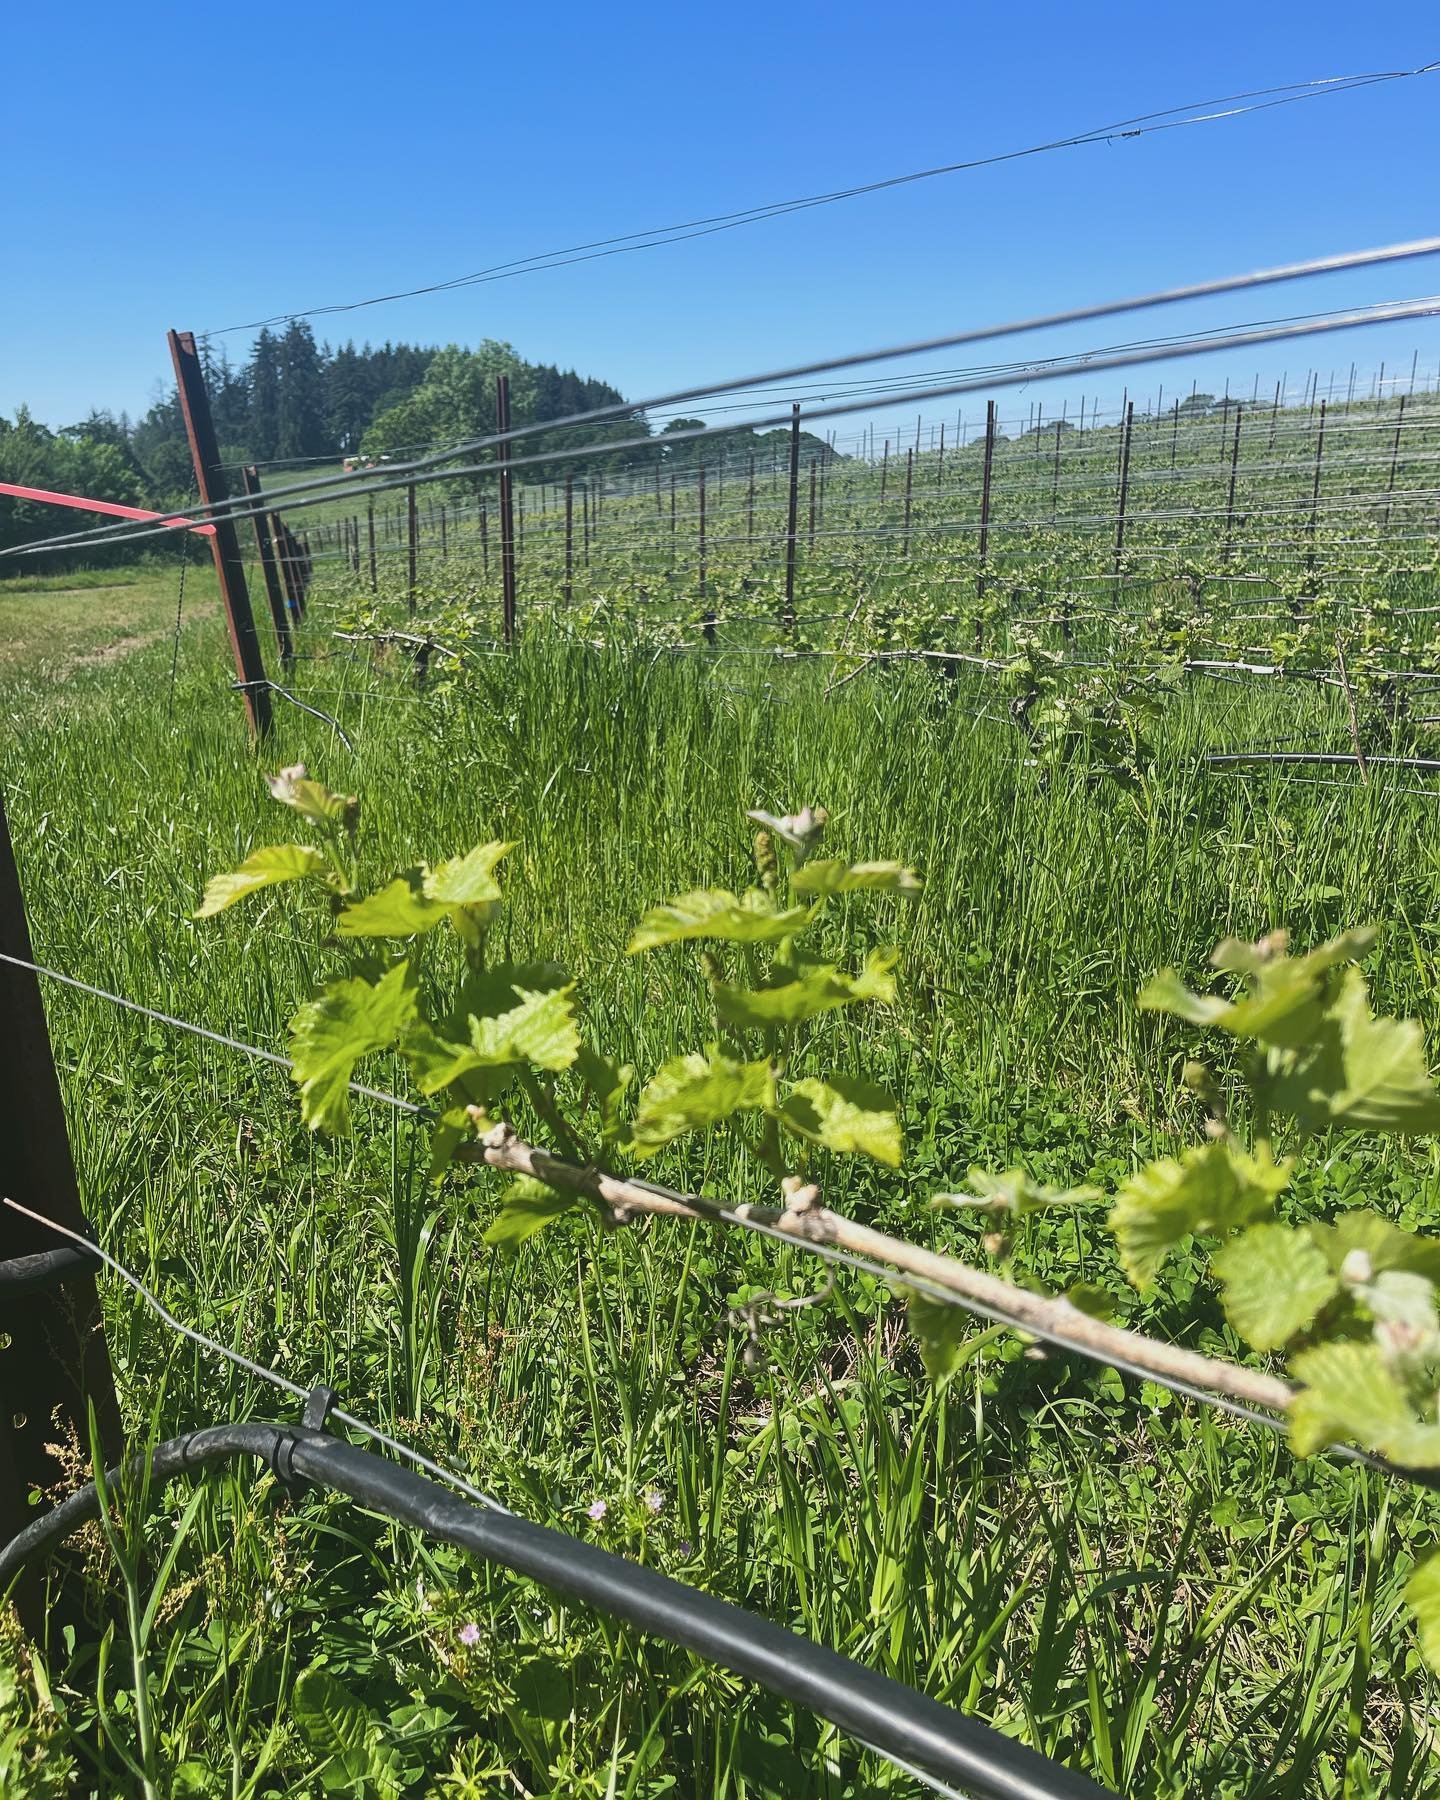 Nothing says Springtime in the vineyard more than seeing these little leafy friends shooting up!

We&rsquo;re a few weeks after bud break and we know that our vines are going to love soaking in the sun all weekend. 

Reservation slots are filling up 